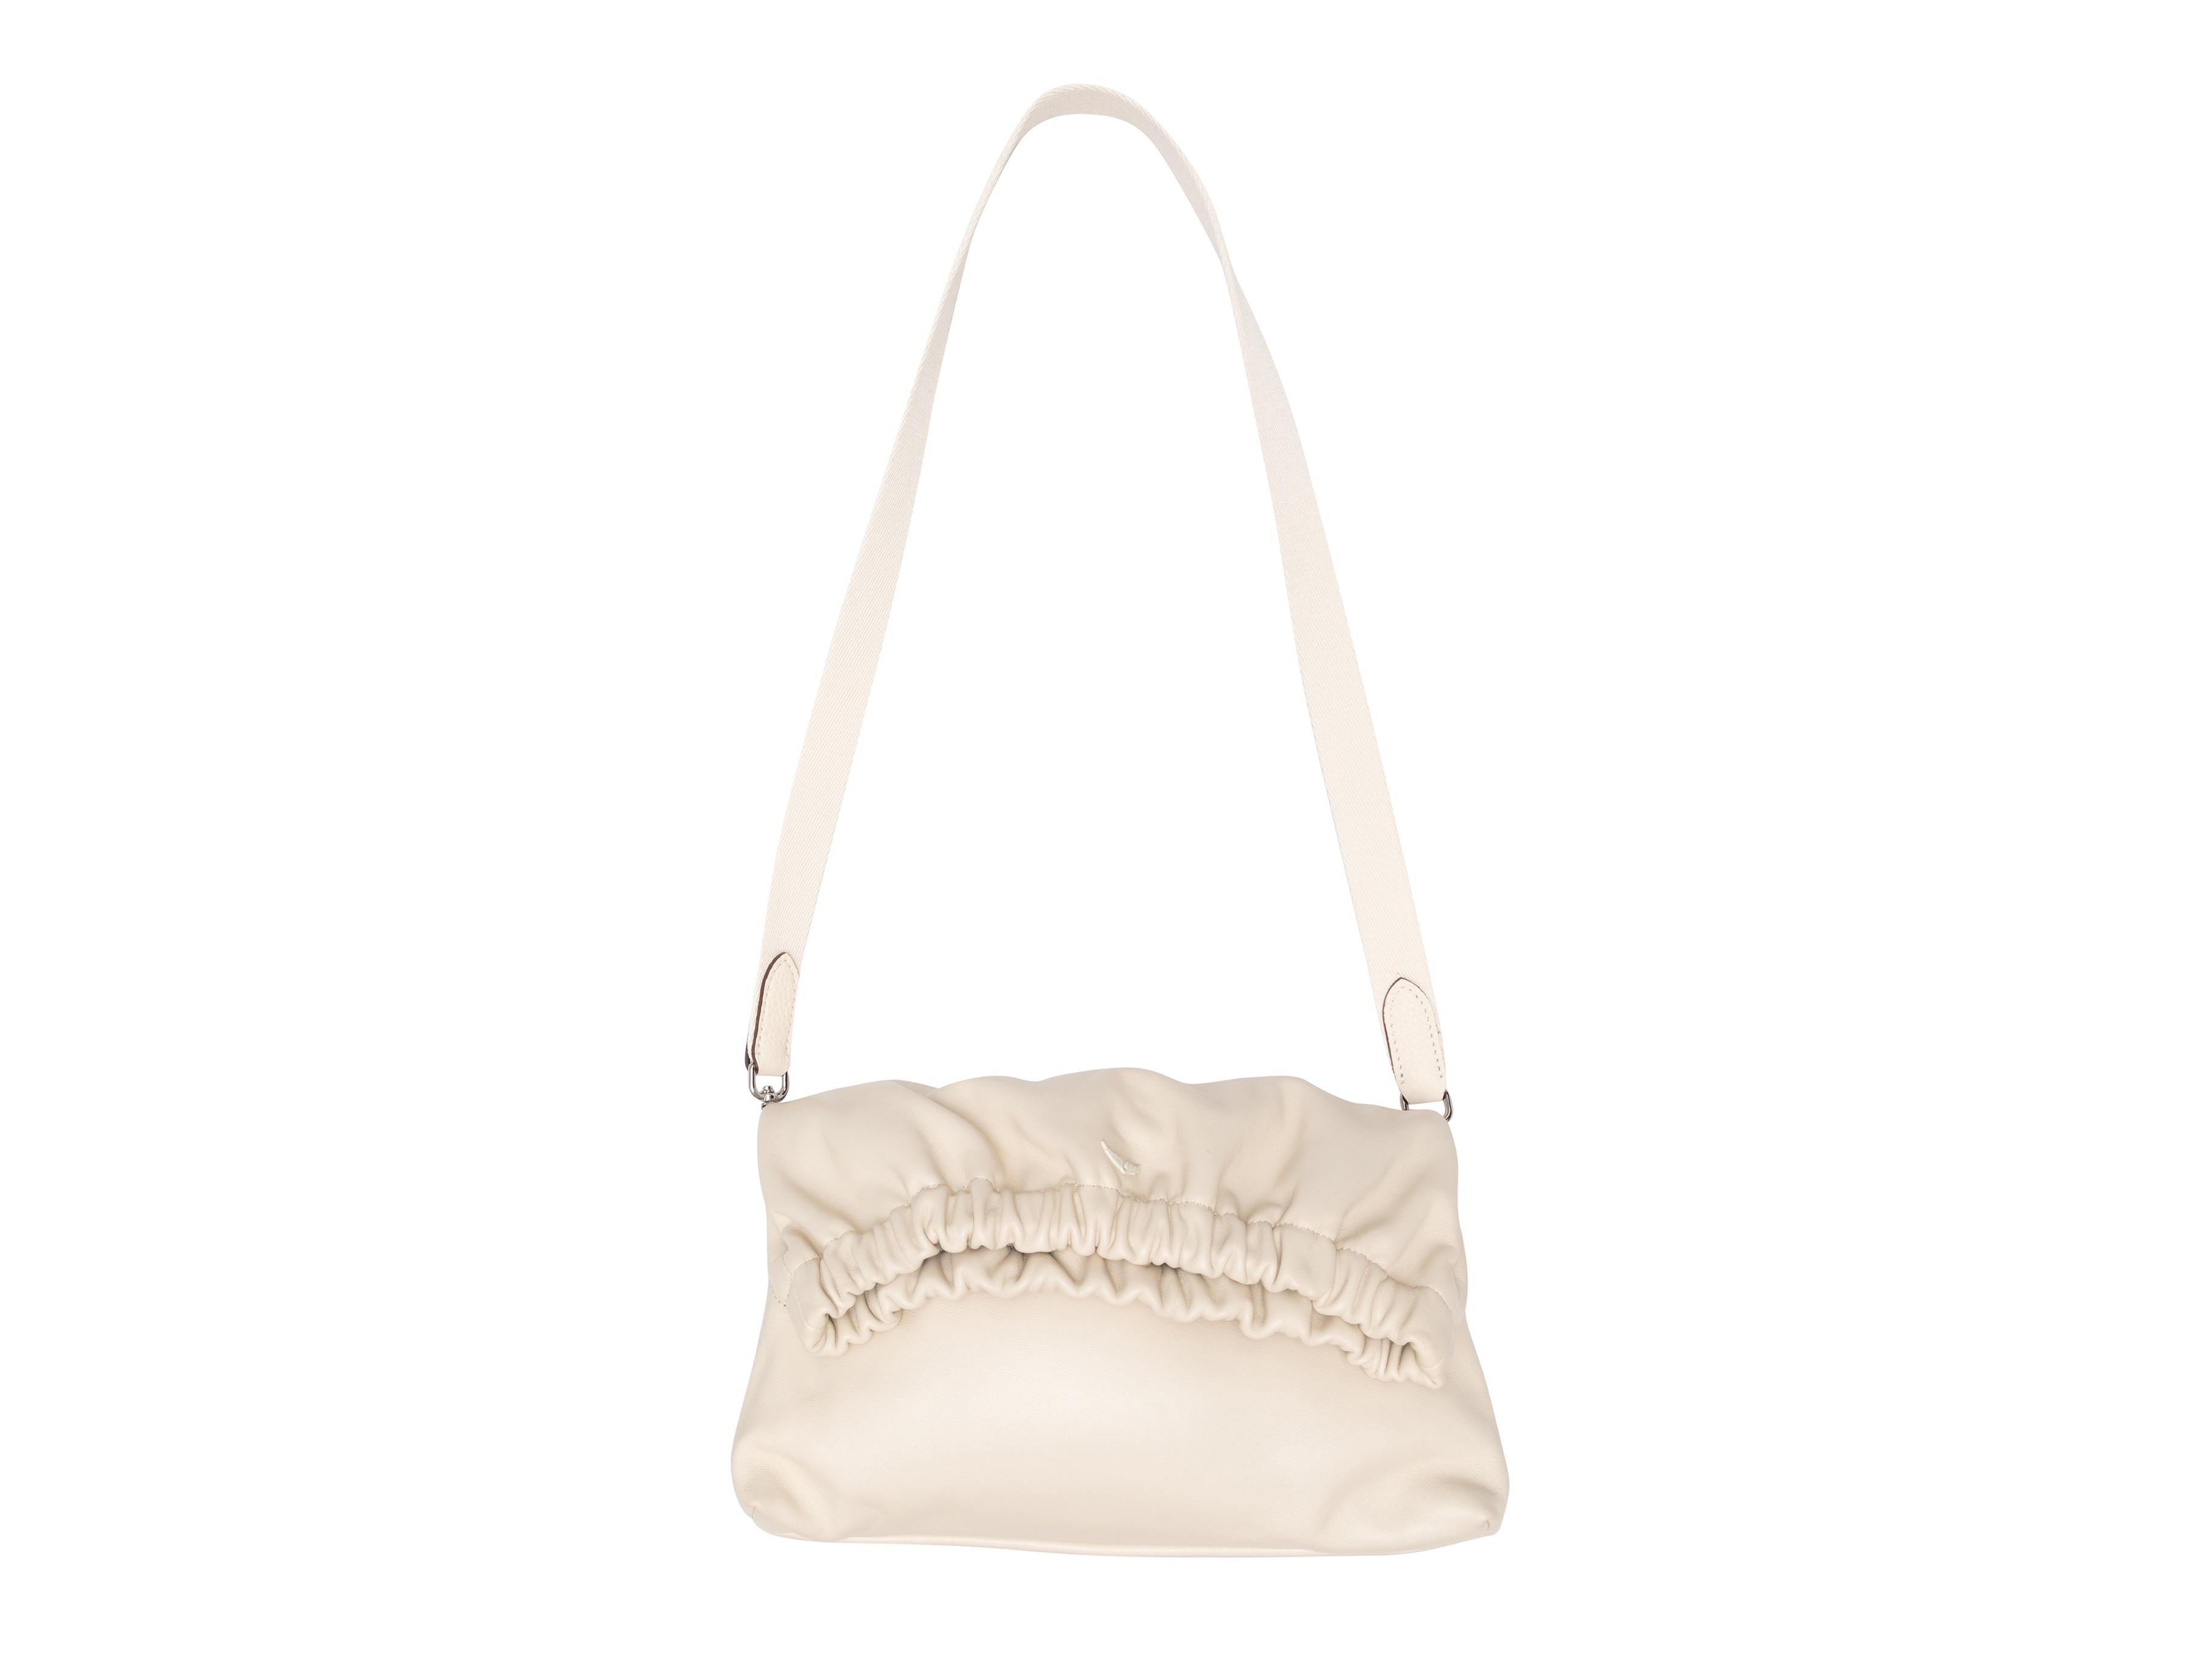 White Zadig & Voltaire Rockyssime Shoulder Bag. The Rockyssime bag features a leather body, silver-tone hardware, multiple strap options, and a foldover top. 12